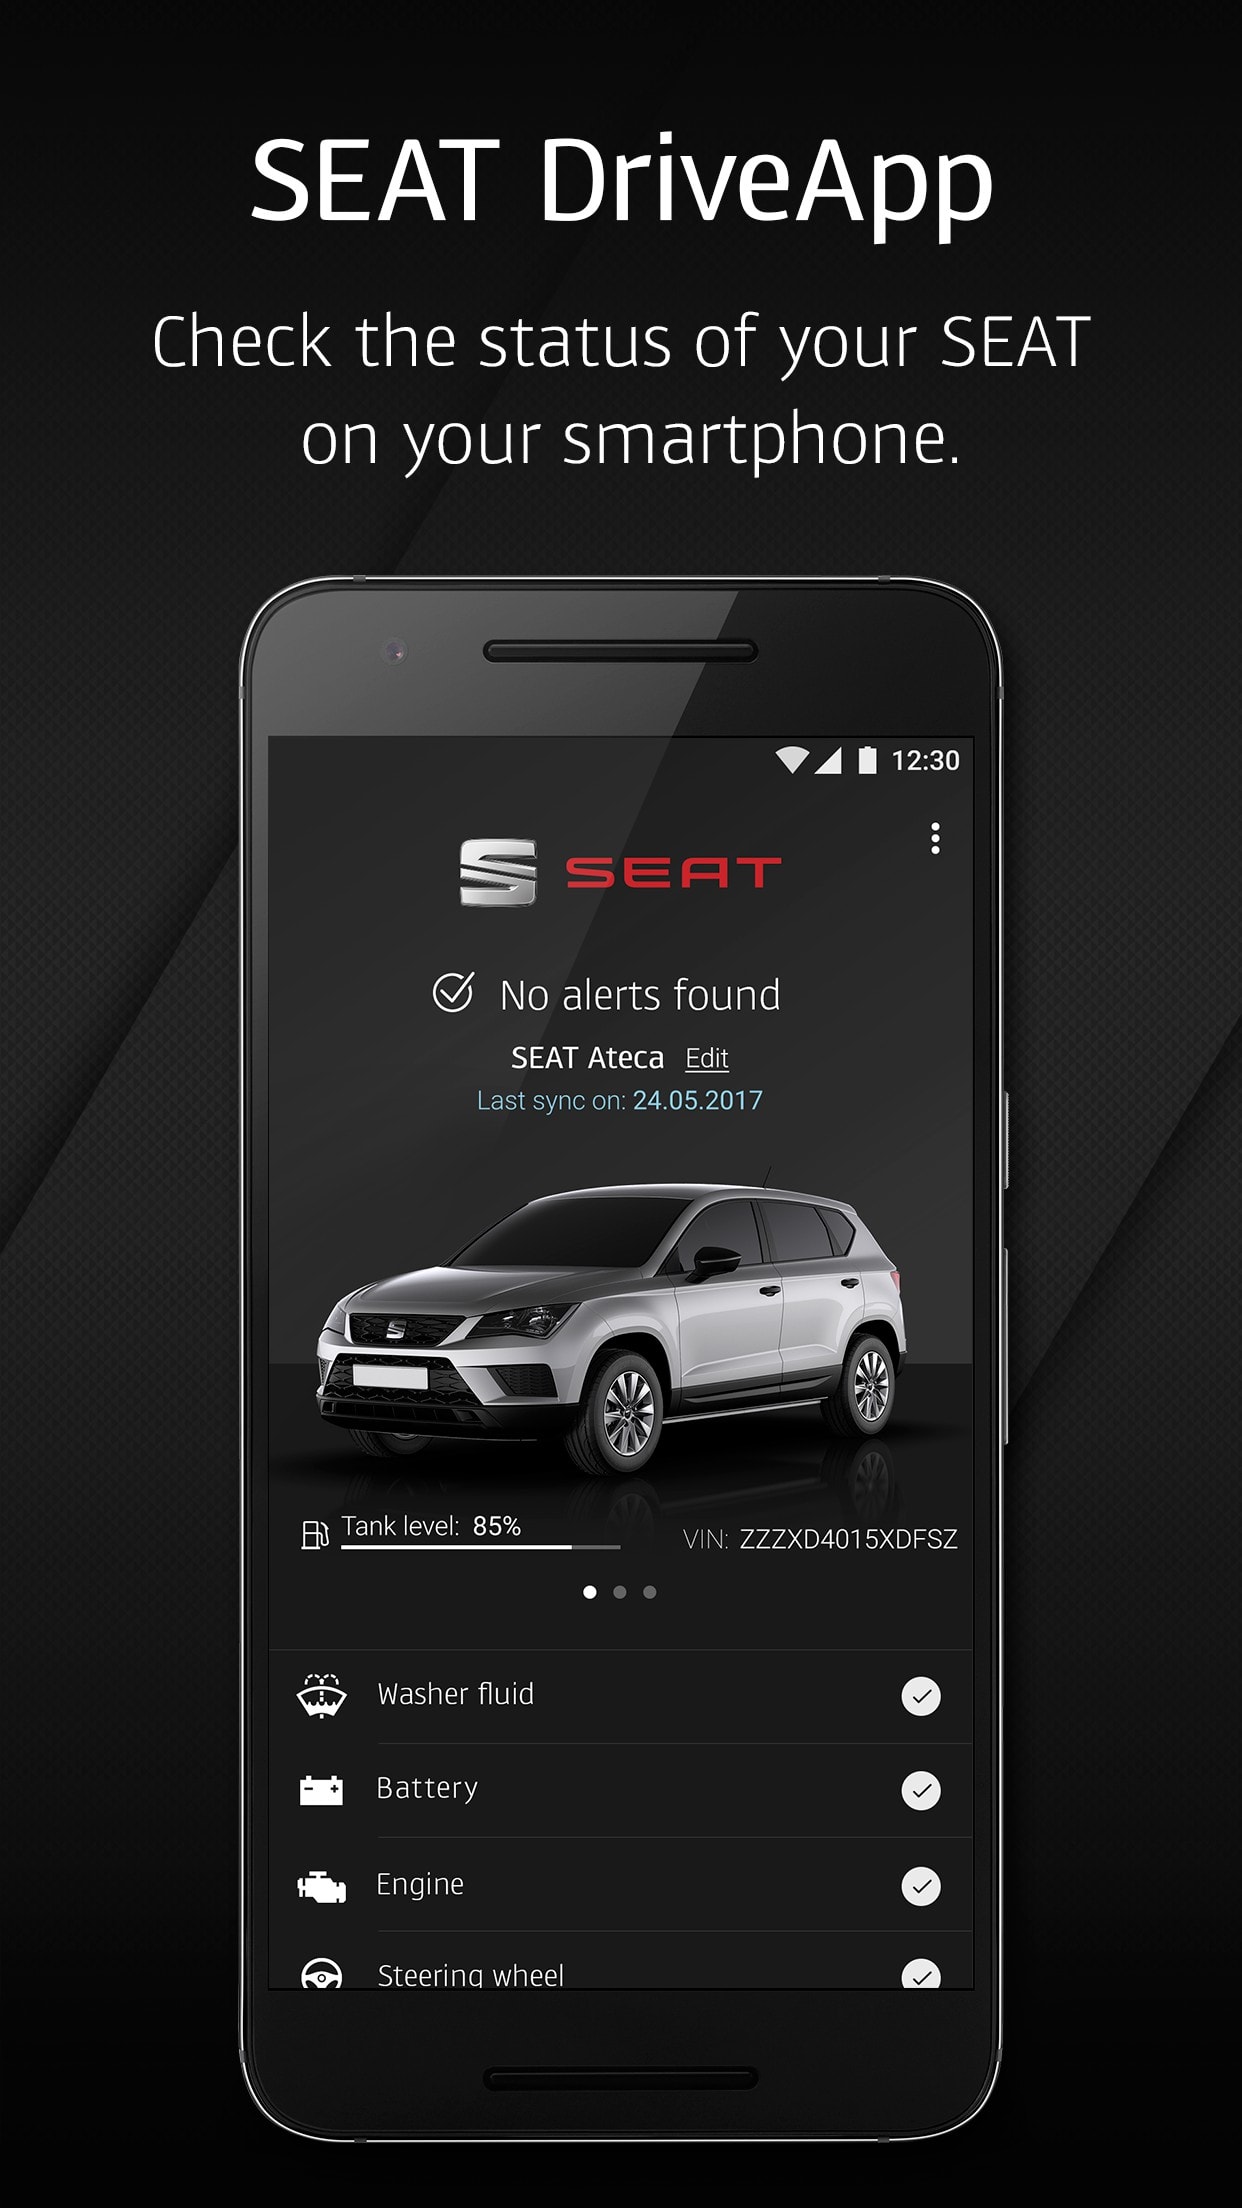 seat introduces android auto capable driveapp in google play store 119122_1